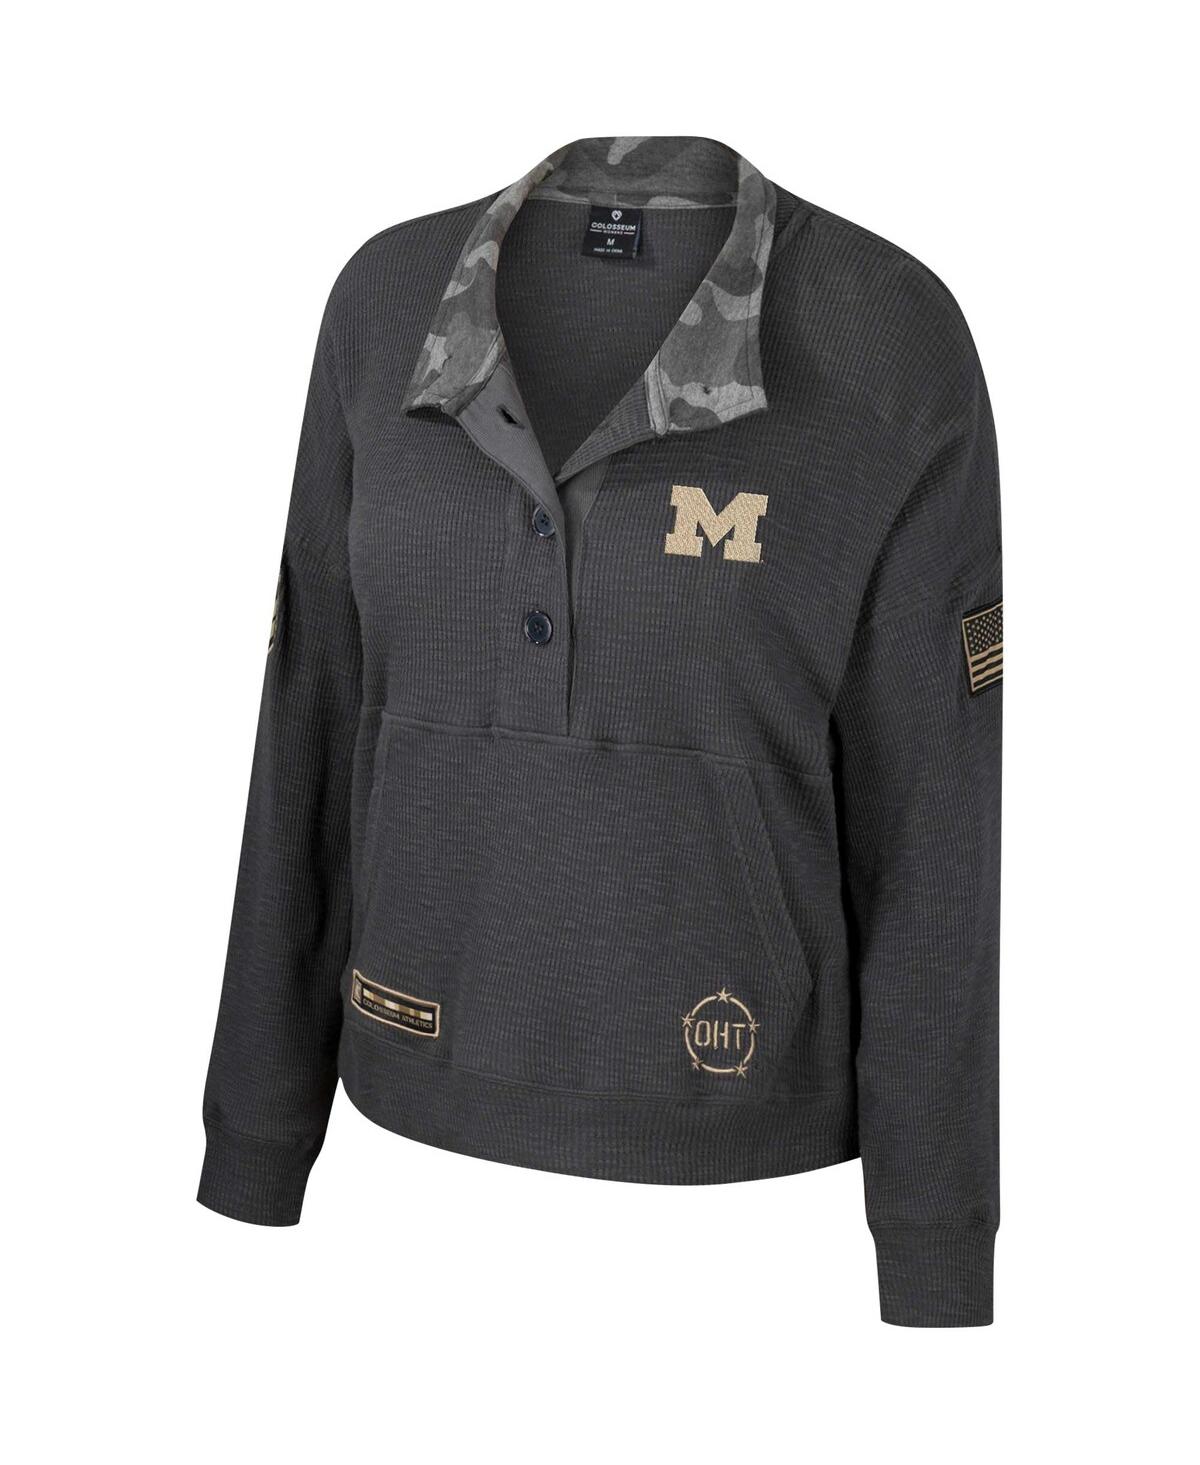 Shop Colosseum Women's  Heather Charcoal Michigan Wolverines Oht Military-inspired Appreciation Payback He